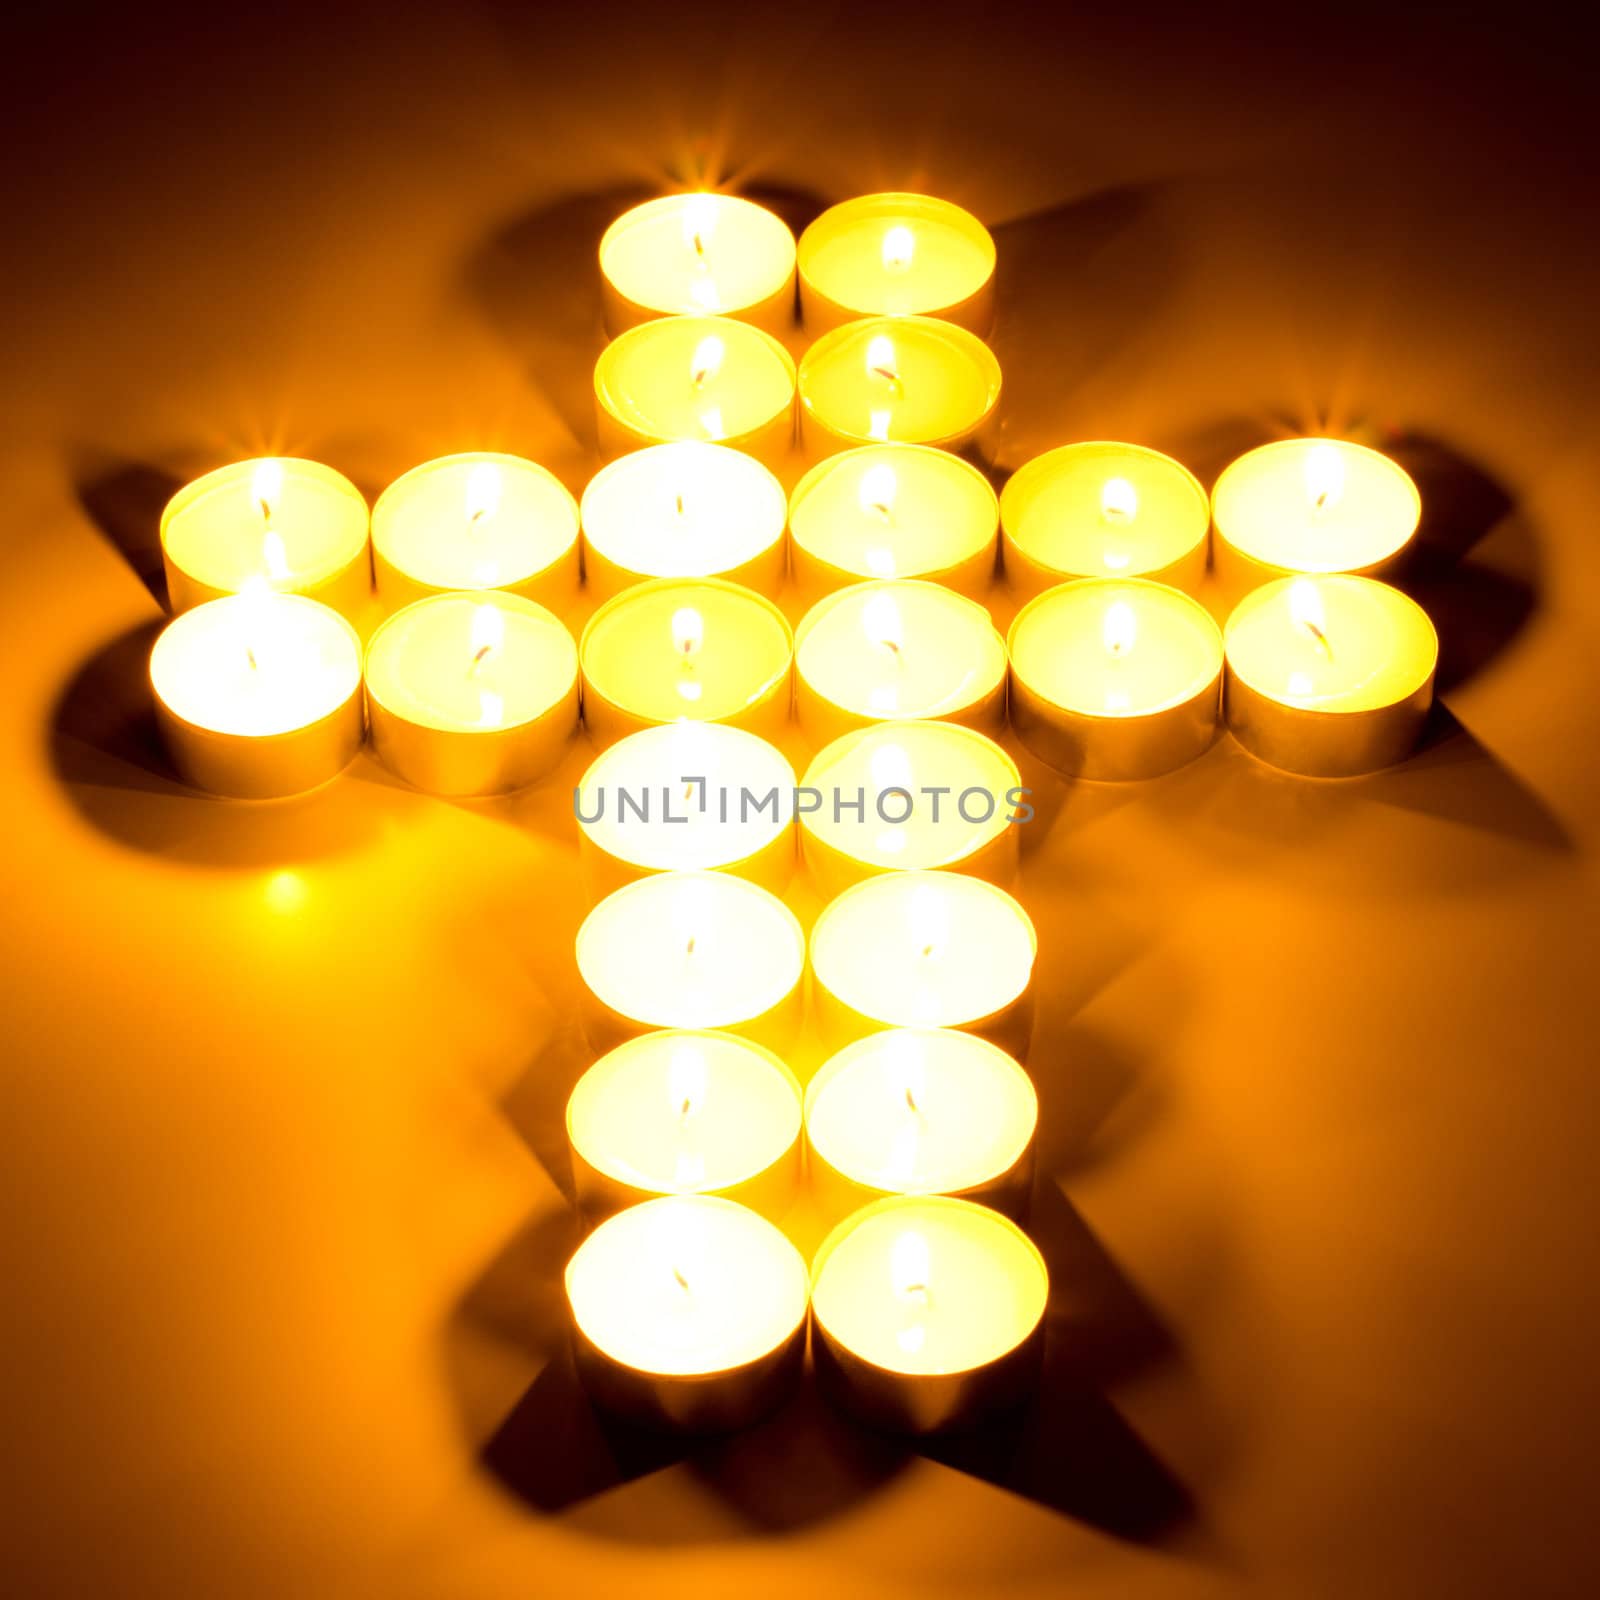 Christian cross made with tea candles by gwolters